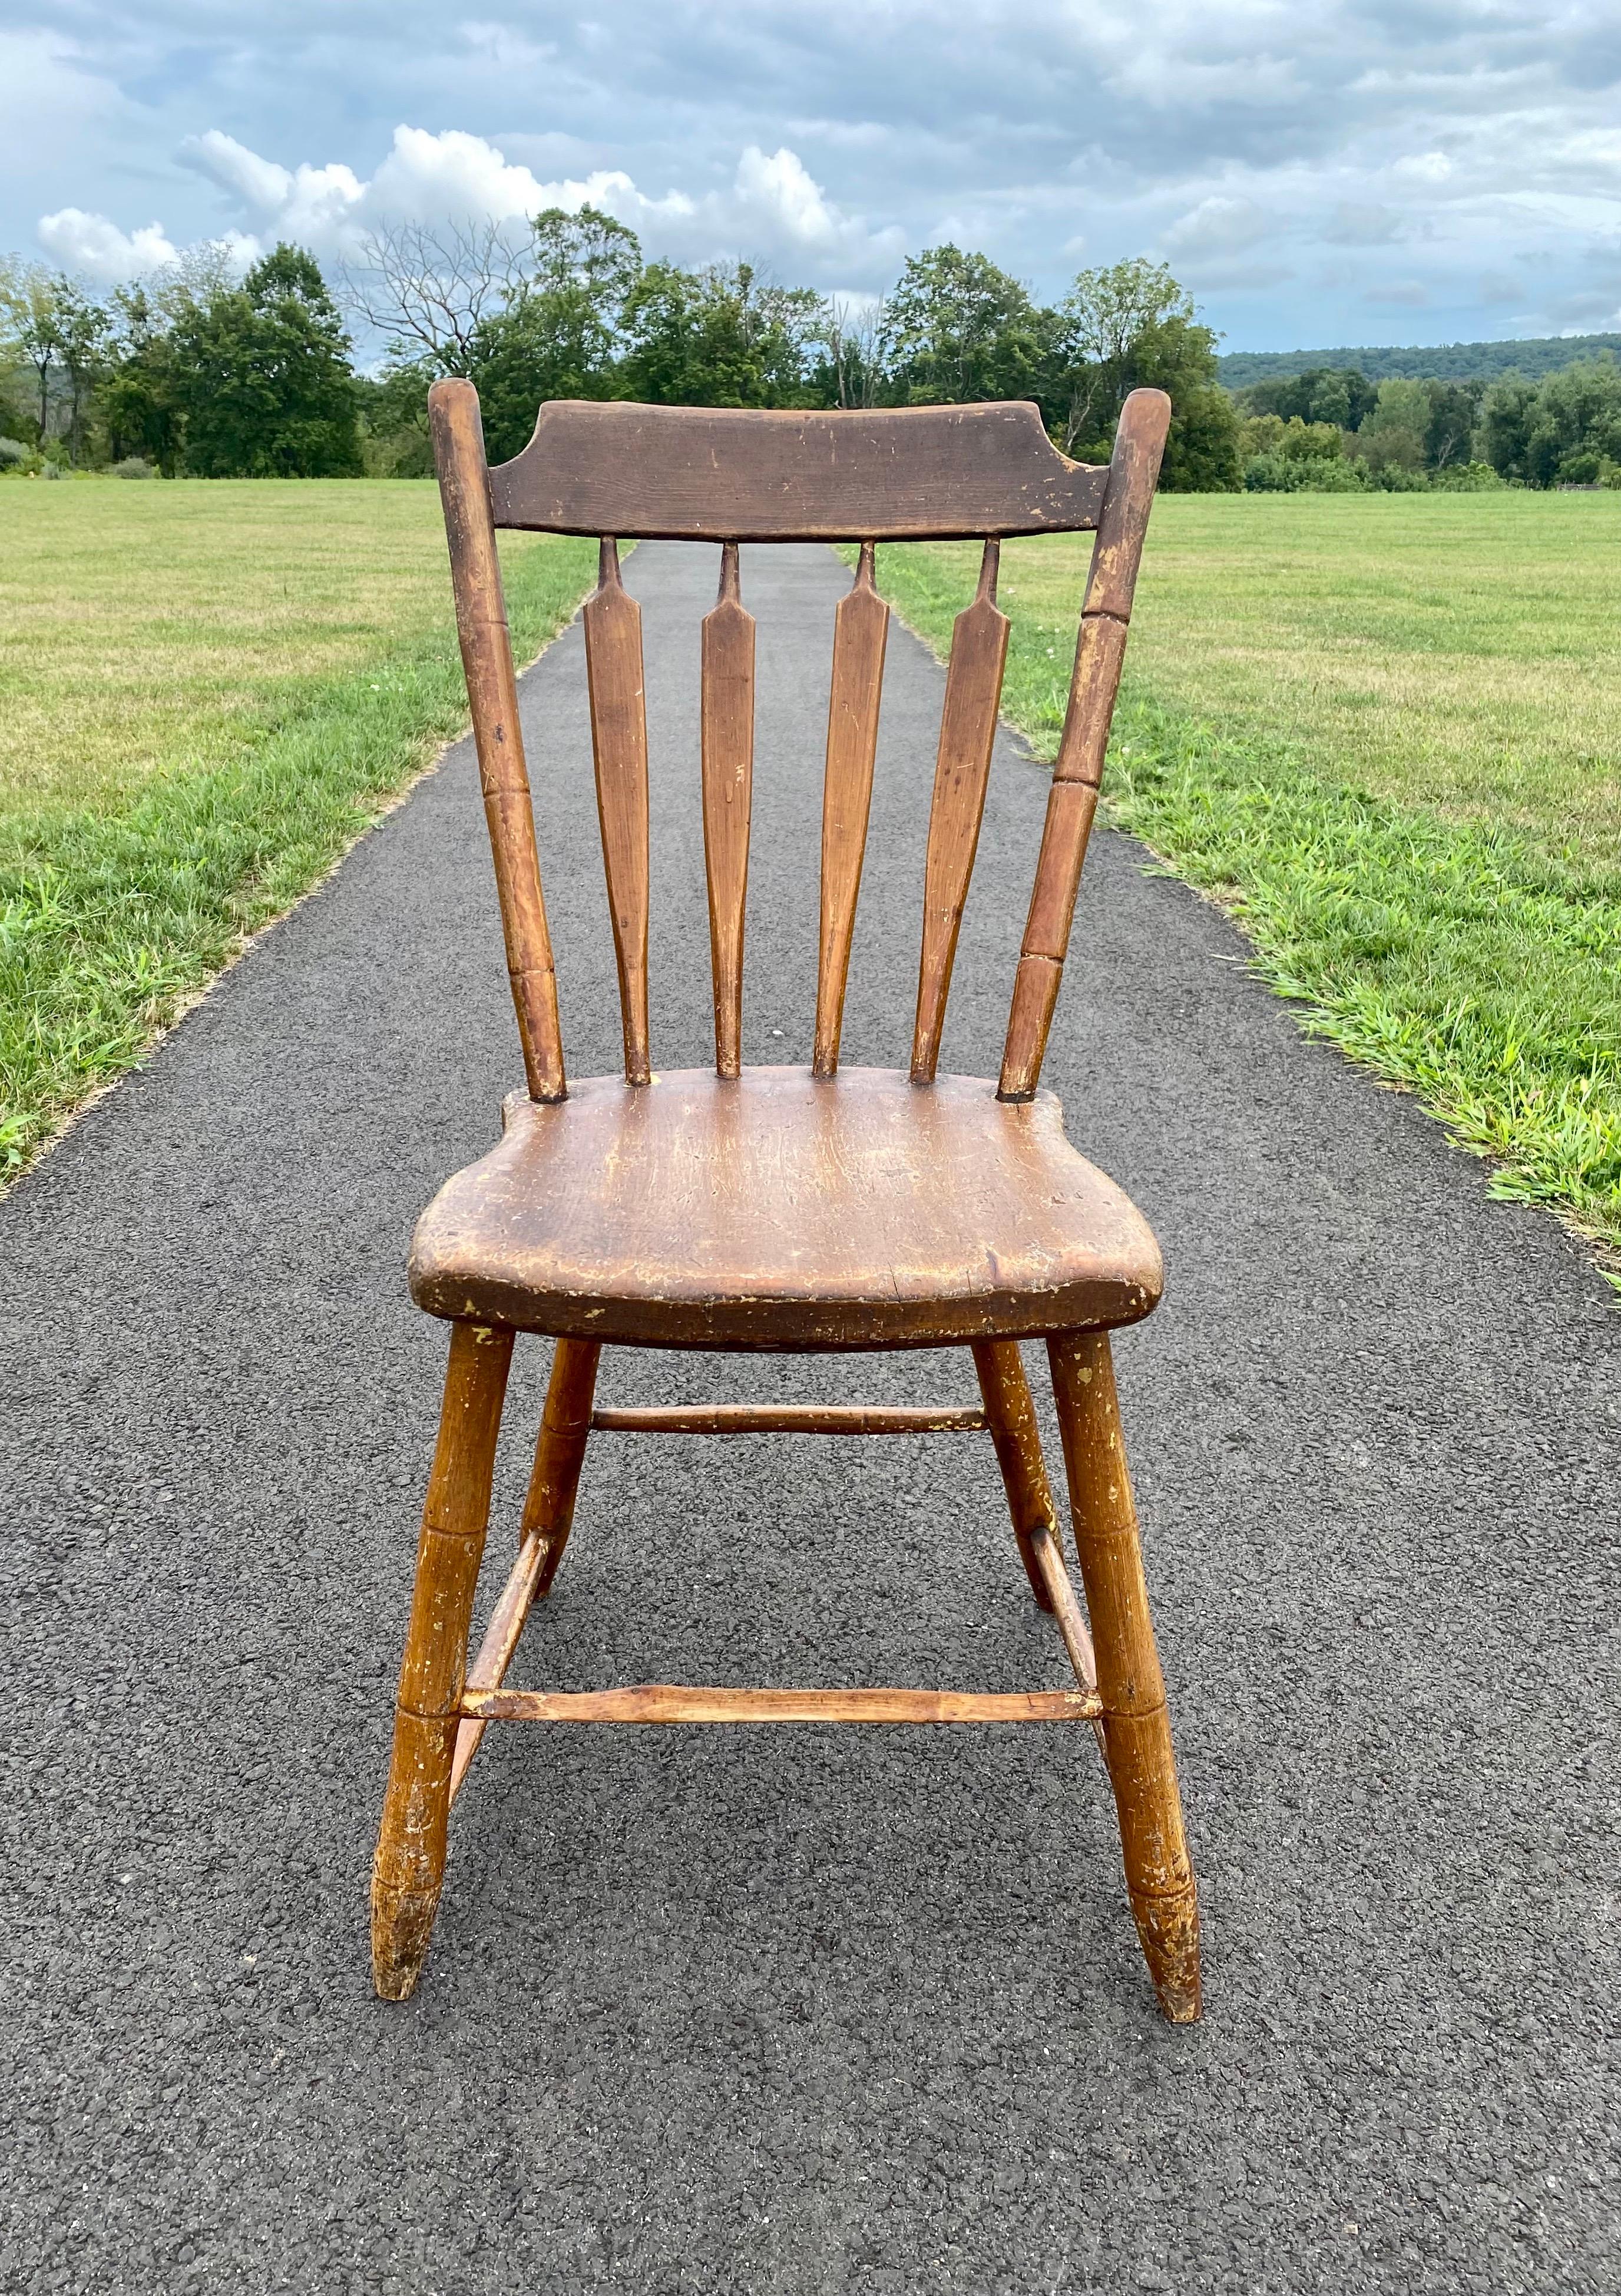 19th century antique arrow back spindle Windsor accent side chair, circa early 1800's. This charming hand carved chair features its original finish with beautiful patina. A charming piece to display in an entrance hallway, a bathroom with a stack of